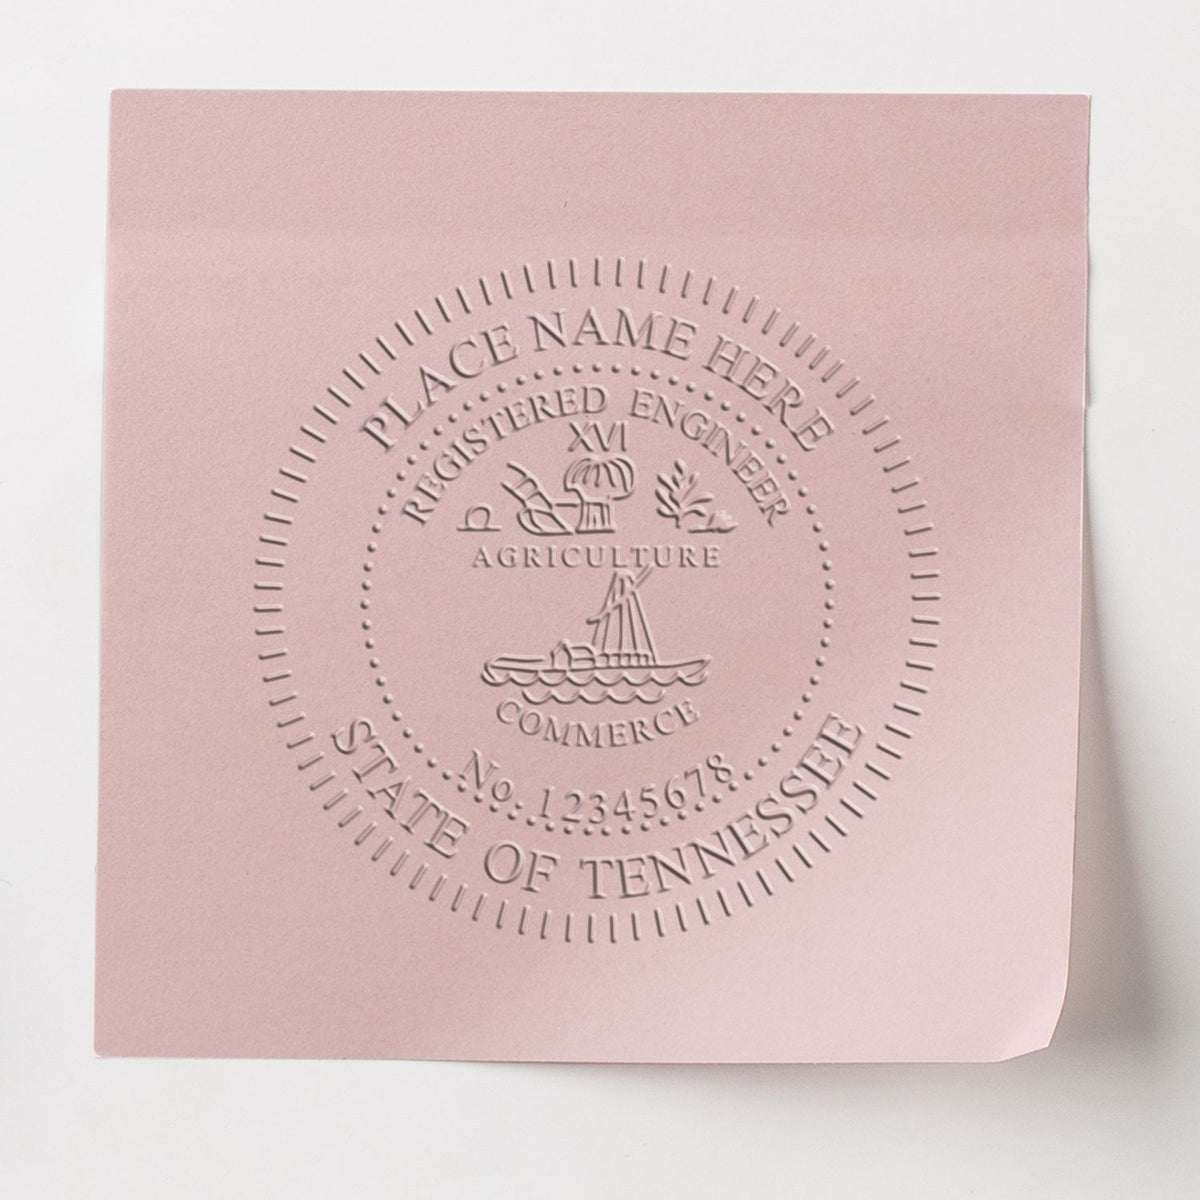 An in use photo of the Gift Tennessee Engineer Seal showing a sample imprint on a cardstock